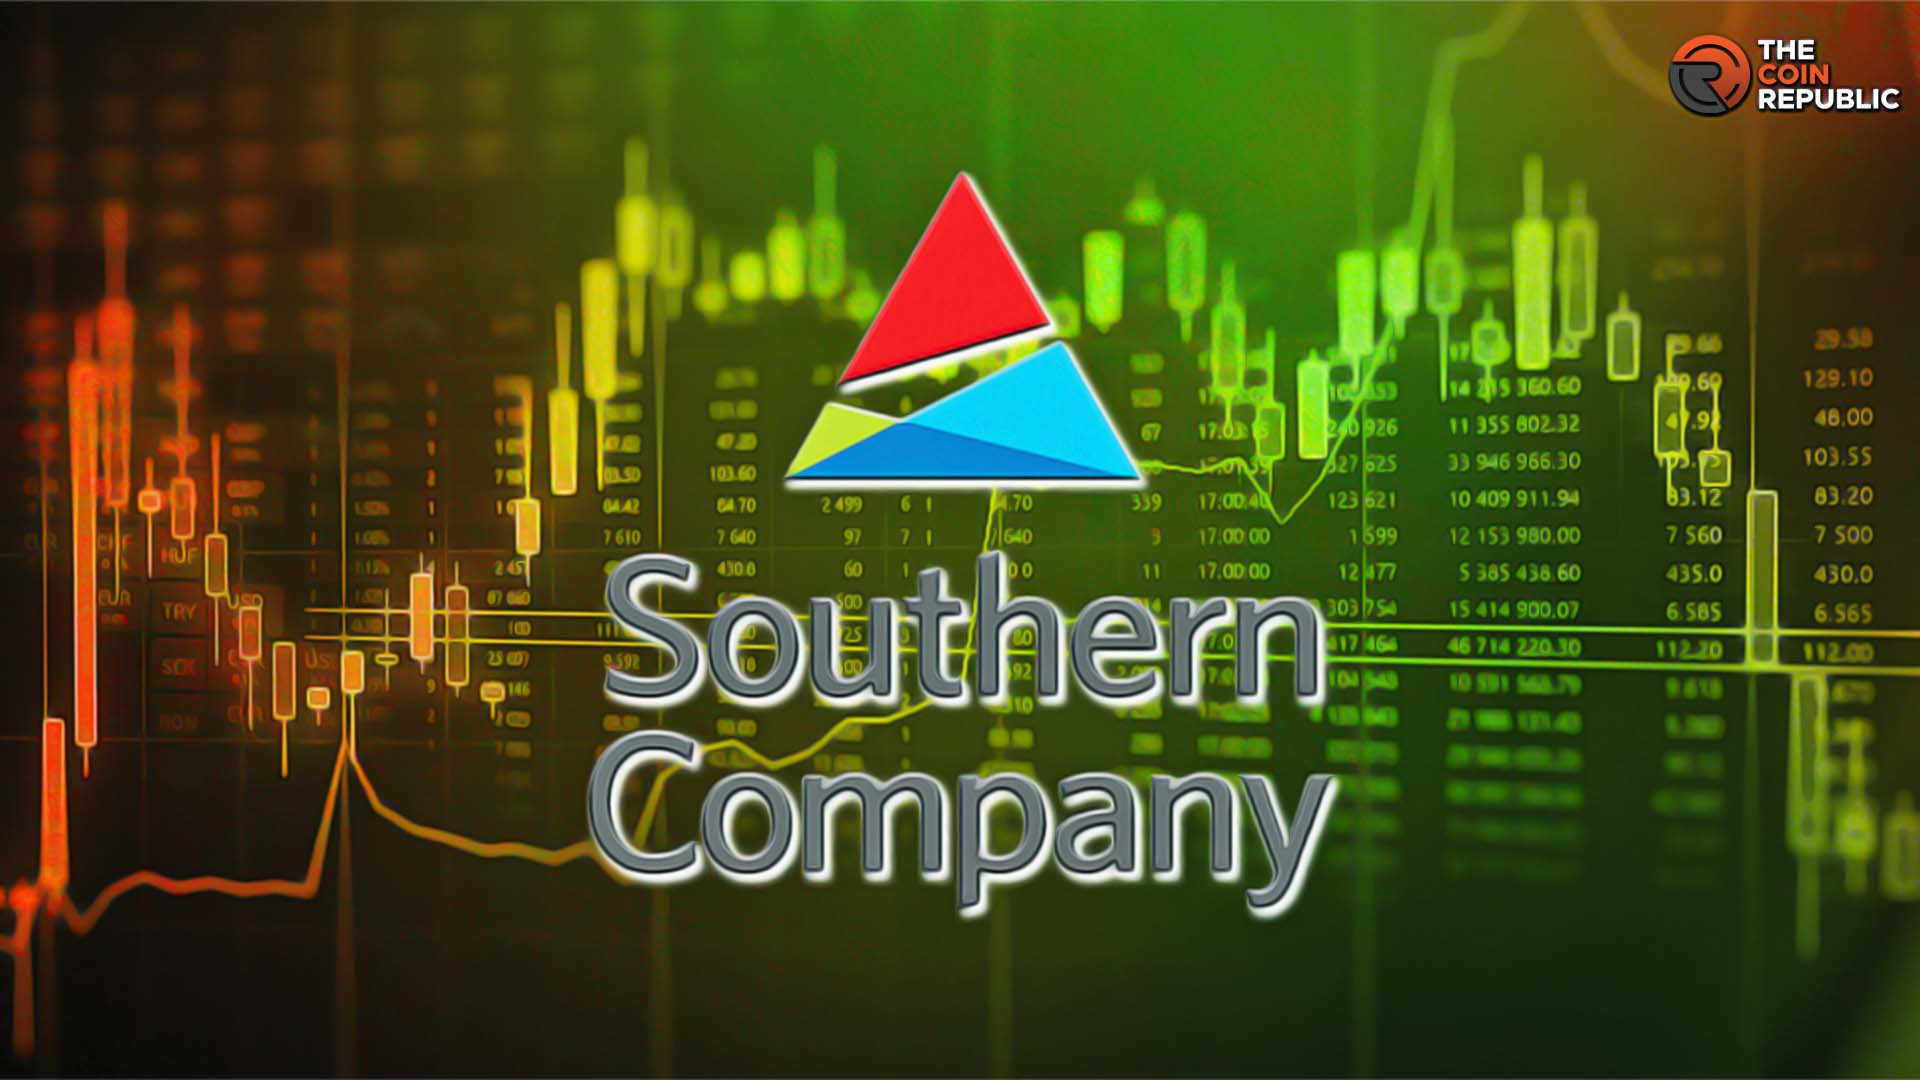 Southern Co. (SO) Stock Breakout, Will the Momentum Extend?